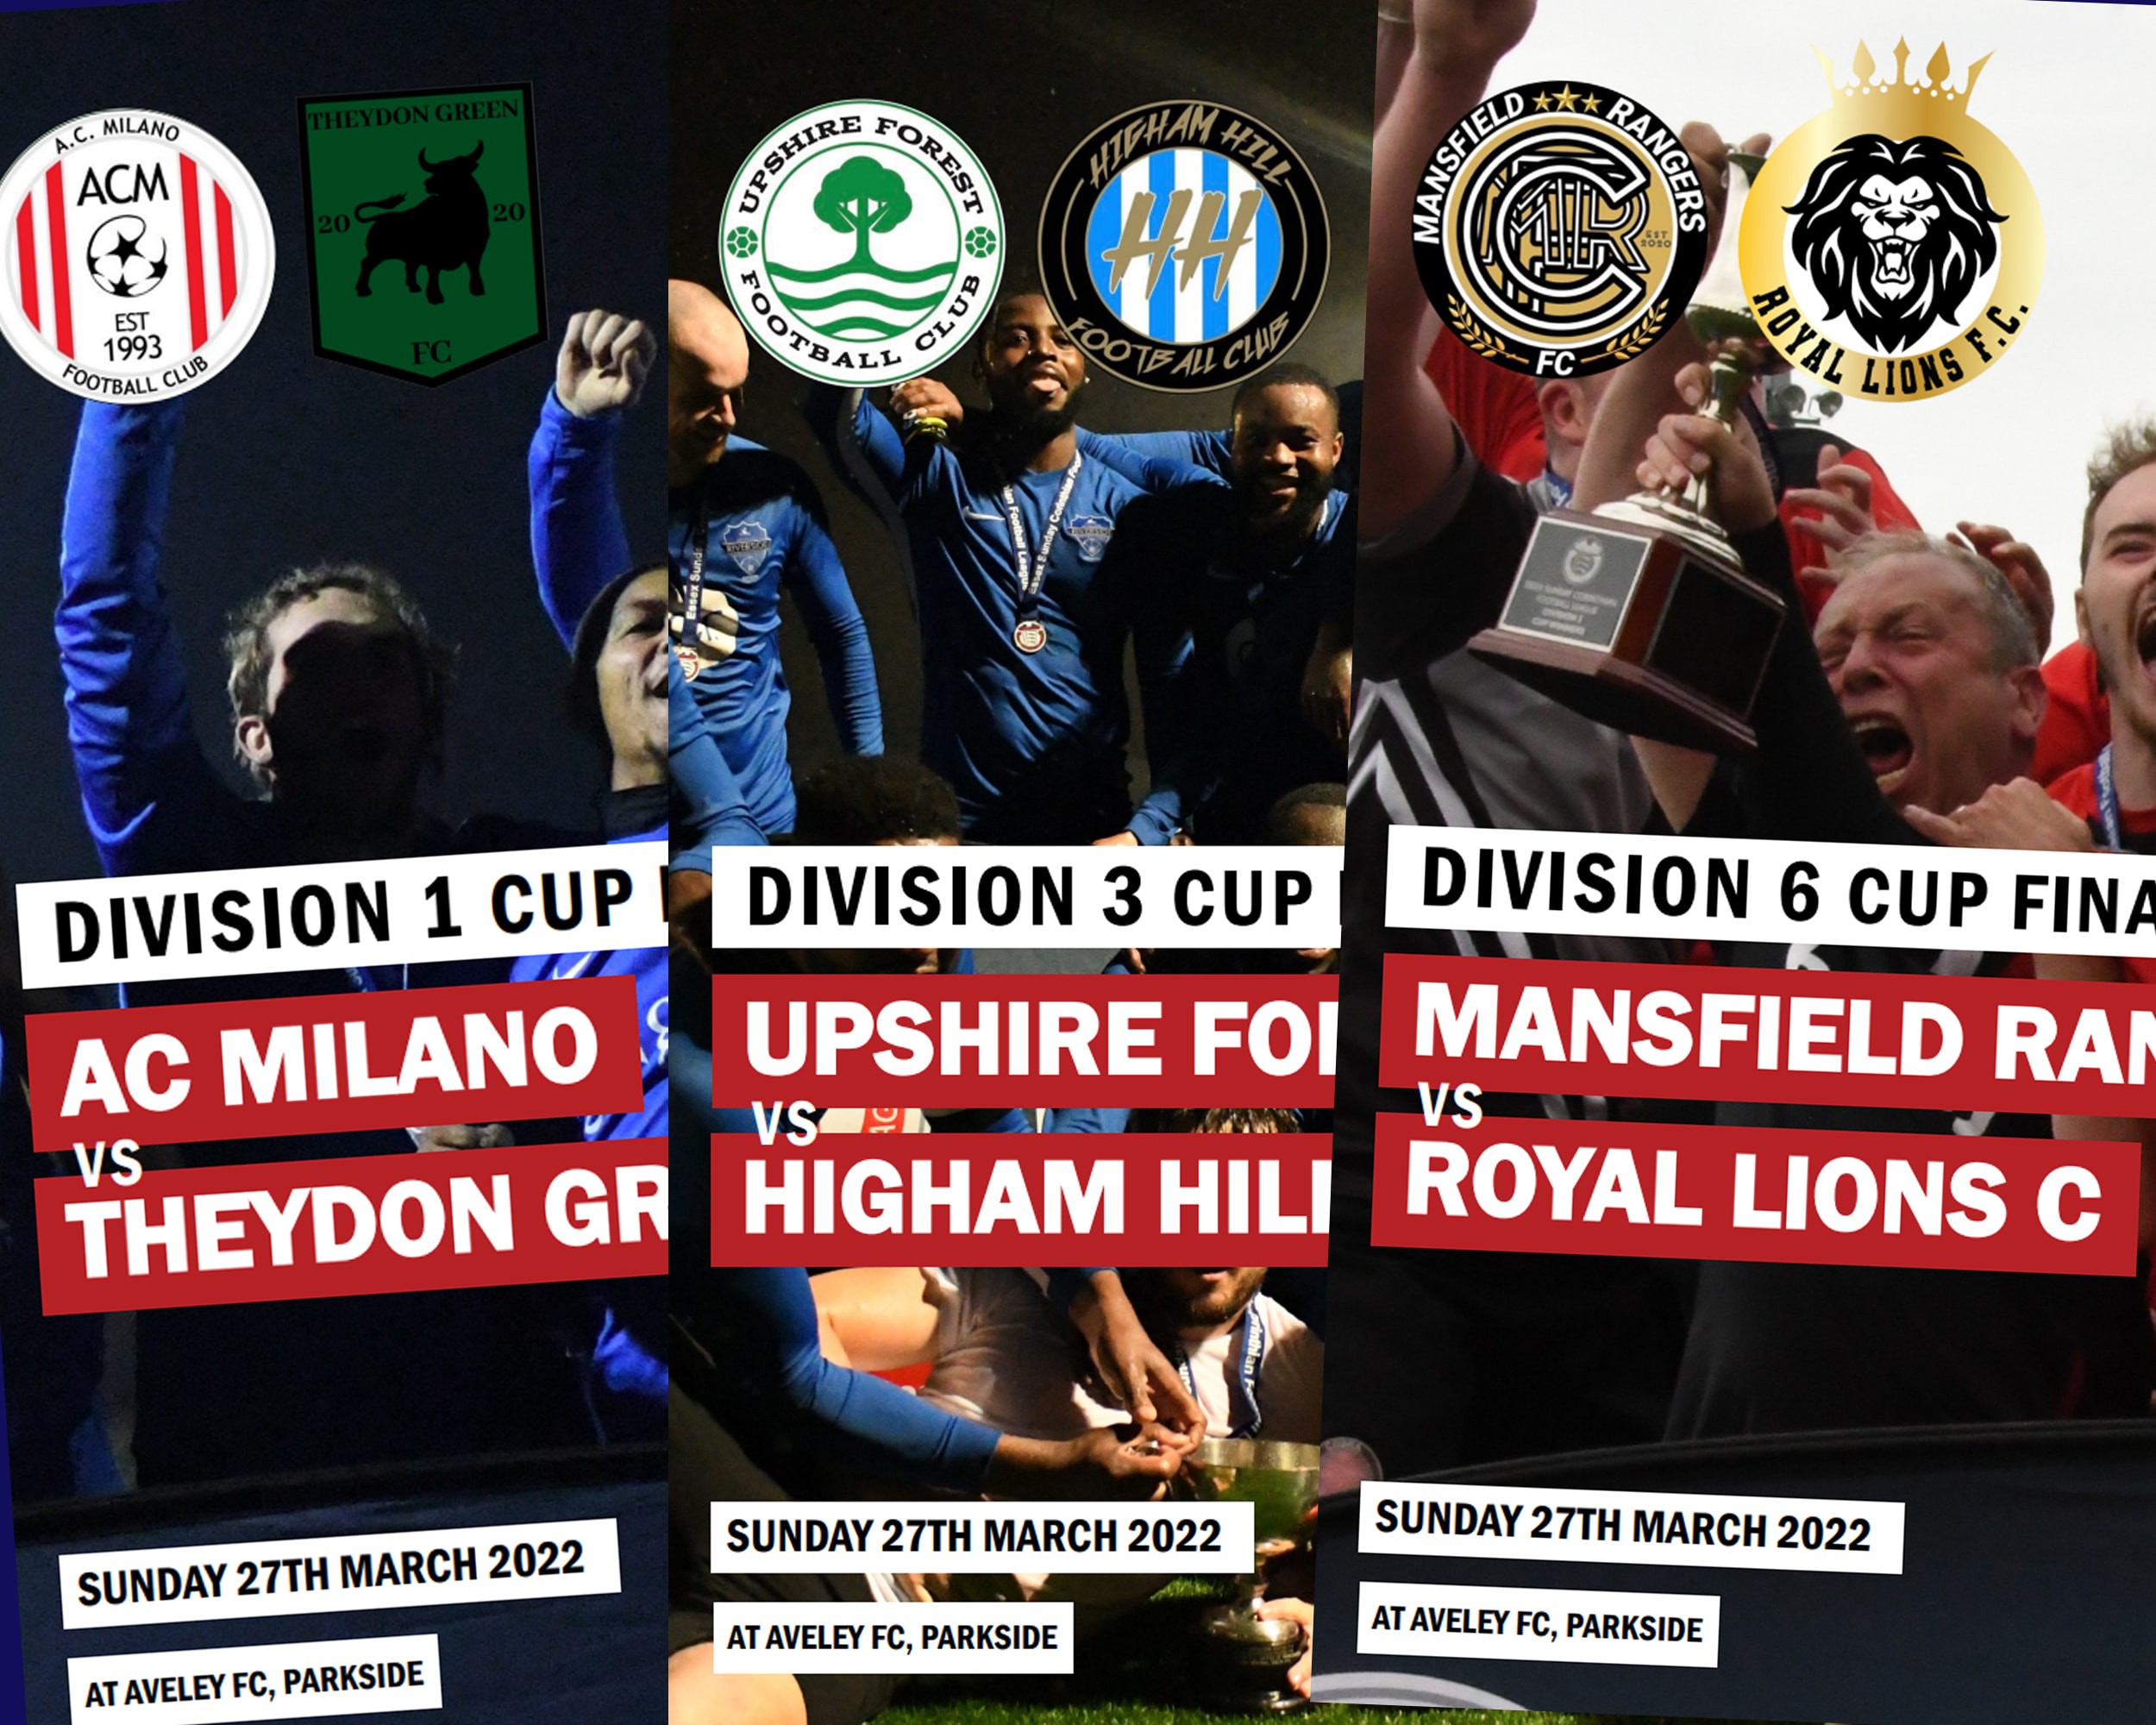 Divisional cup finals kick off this weekend at Parkside